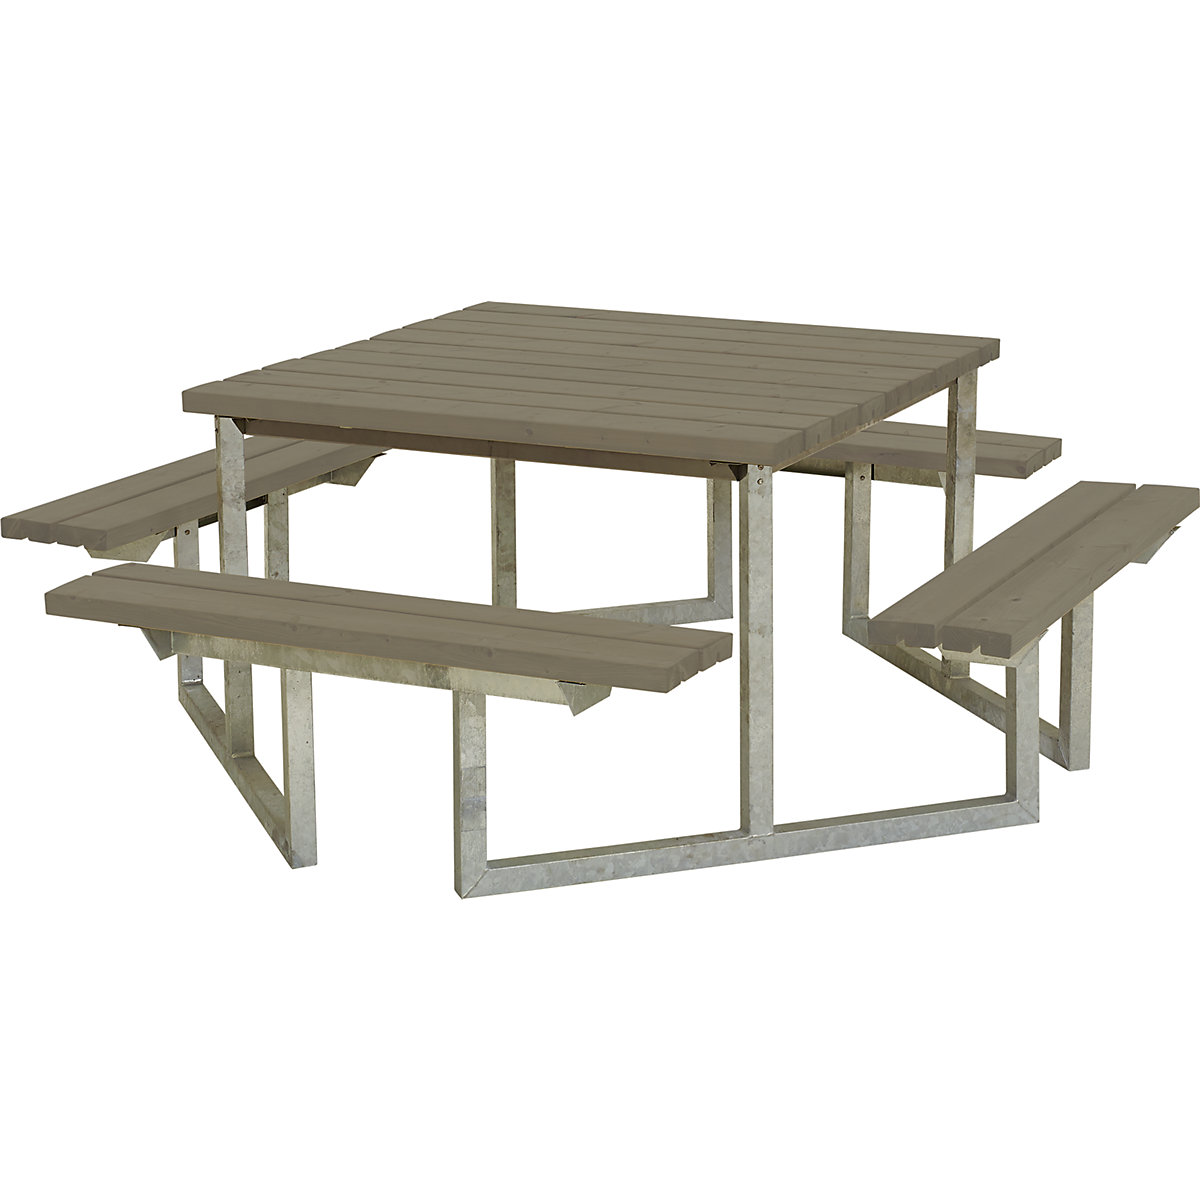 Picnic bench for 8 people, certified pine wood, grey brown-9